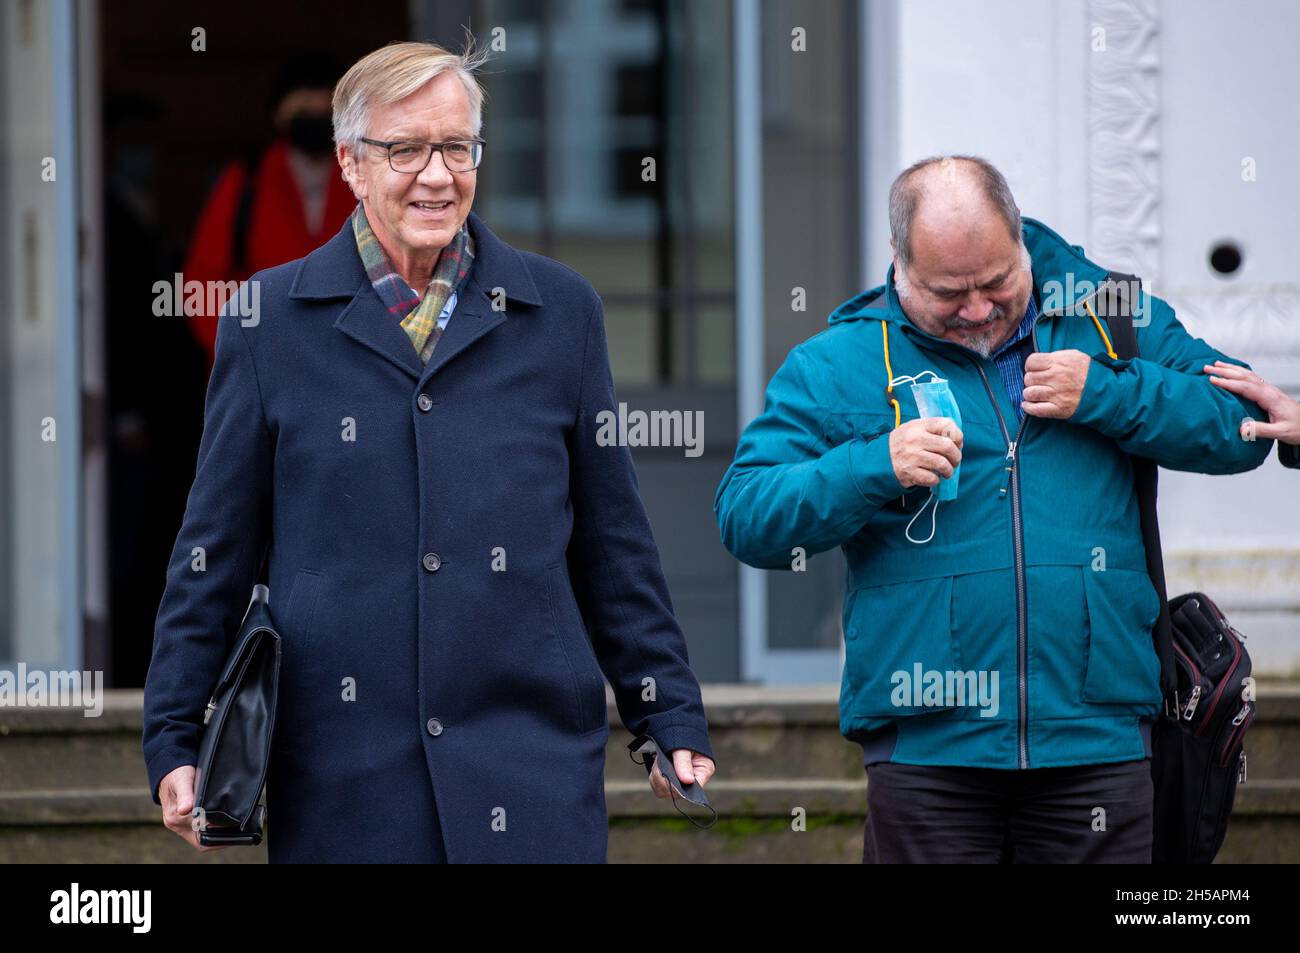 Mecklenburg-Western Pomerania, Schwerin, 08 November 2021,  Schwerin, Germany. 08th Nov, 2021. Dietmar Bartsch (l), chairman of the Left party's parliamentary group in the Bundestag, and Peter Ritter (r), a participant in the Left party's negotiating group, walk to a final meeting during coalition negotiations between the SPD and the Left party in Mecklenburg-Western Pomerania. The coalition agreement for red-red in Mecklenburg-Western Pomerania is ready, Schwesig tweeted earlier. The negotiators Schwesig and Oldenburg want to present the contract publicly later. Credit: Jens Büttner/dpa-Zentr Stock Photo